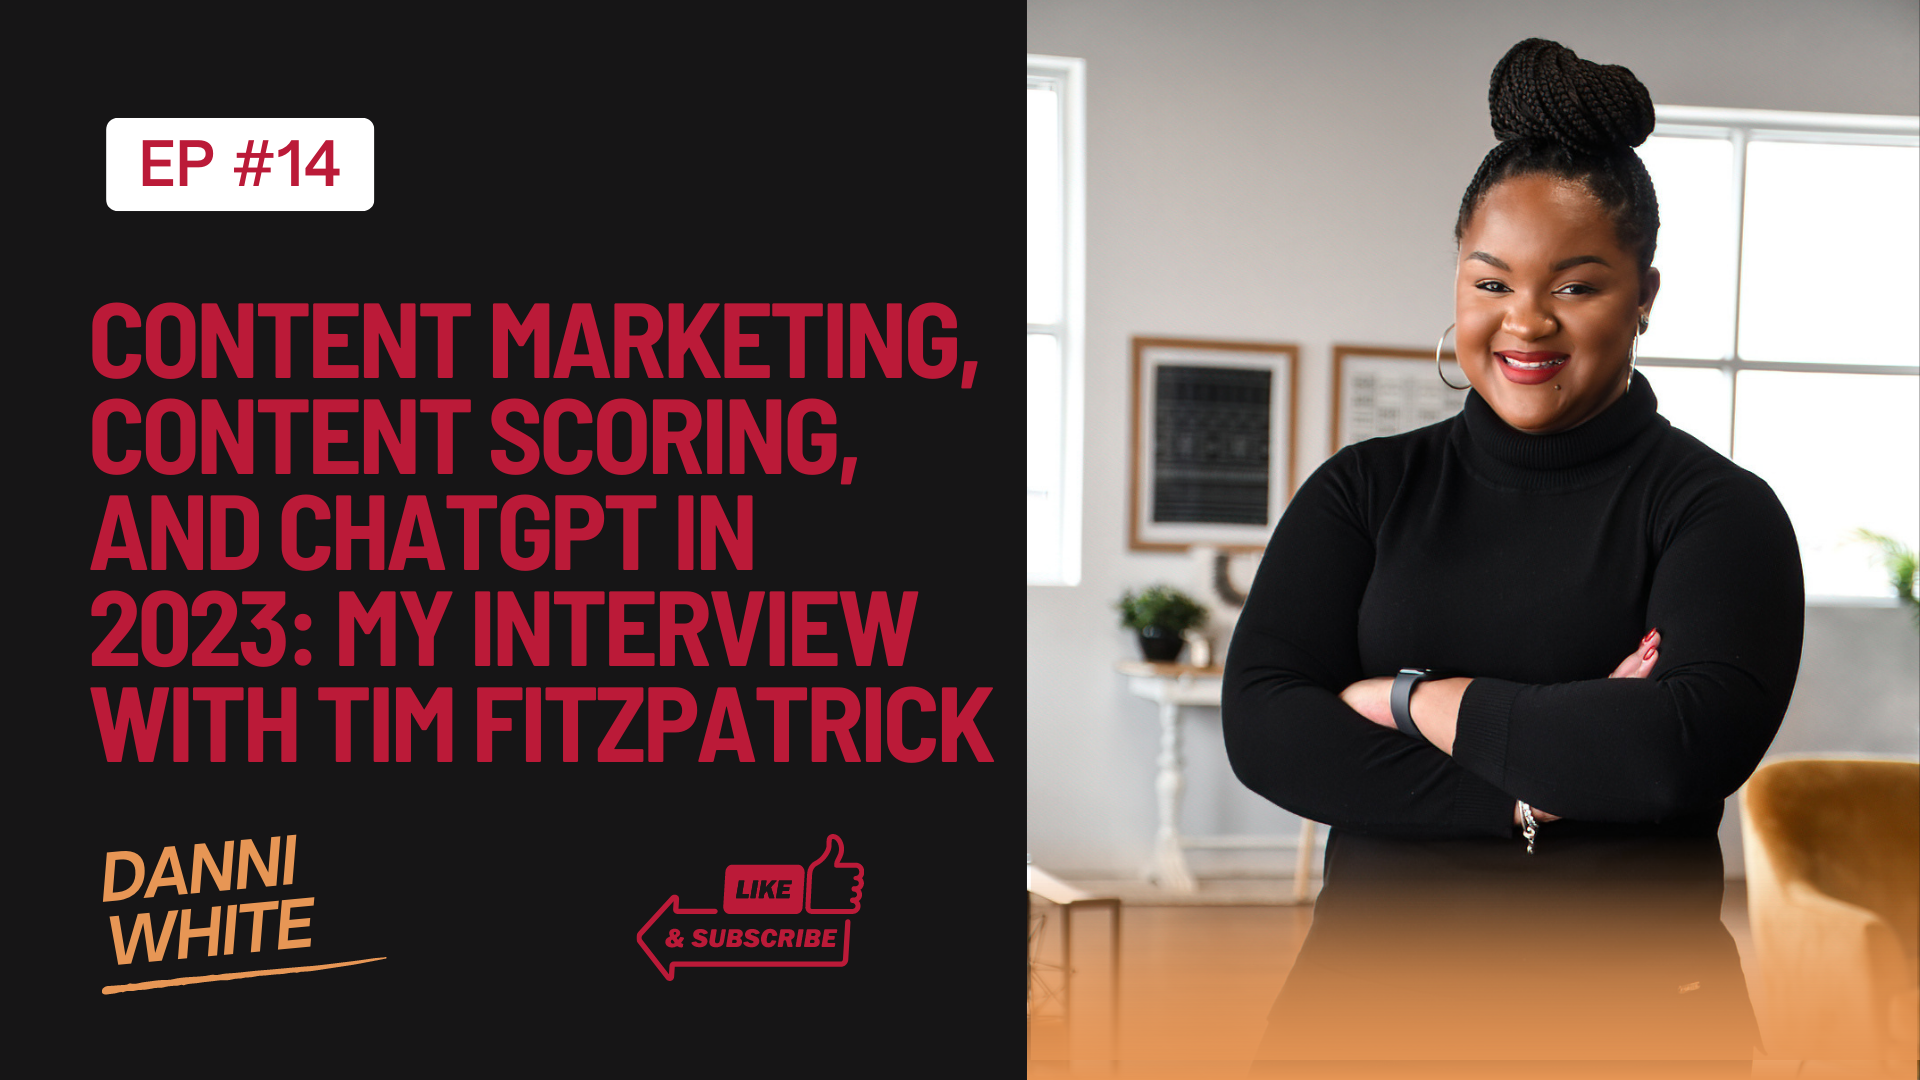 Episode #14: Content Marketing, Content Scoring, and ChatGPT in 2023: My Interview with Tim Fitzpatrick